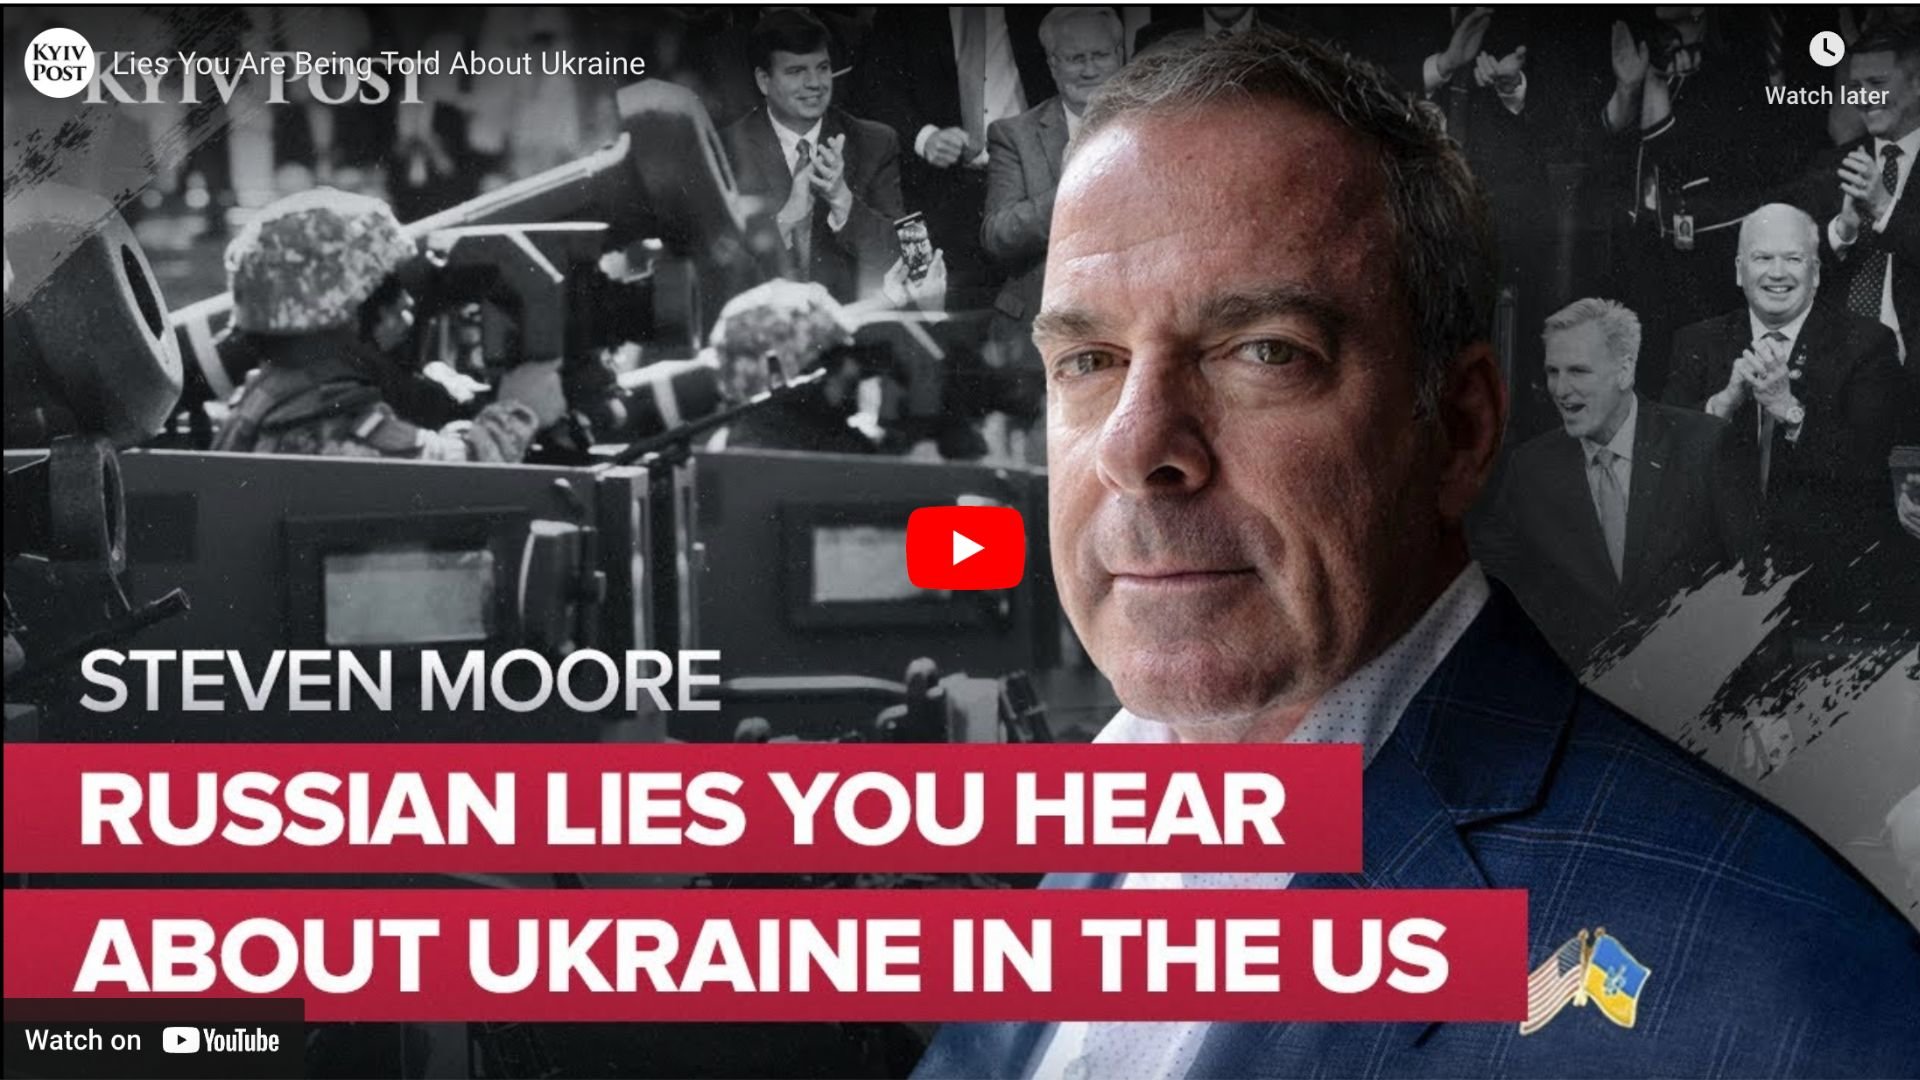 Lies You Are Being Told About Ukraine